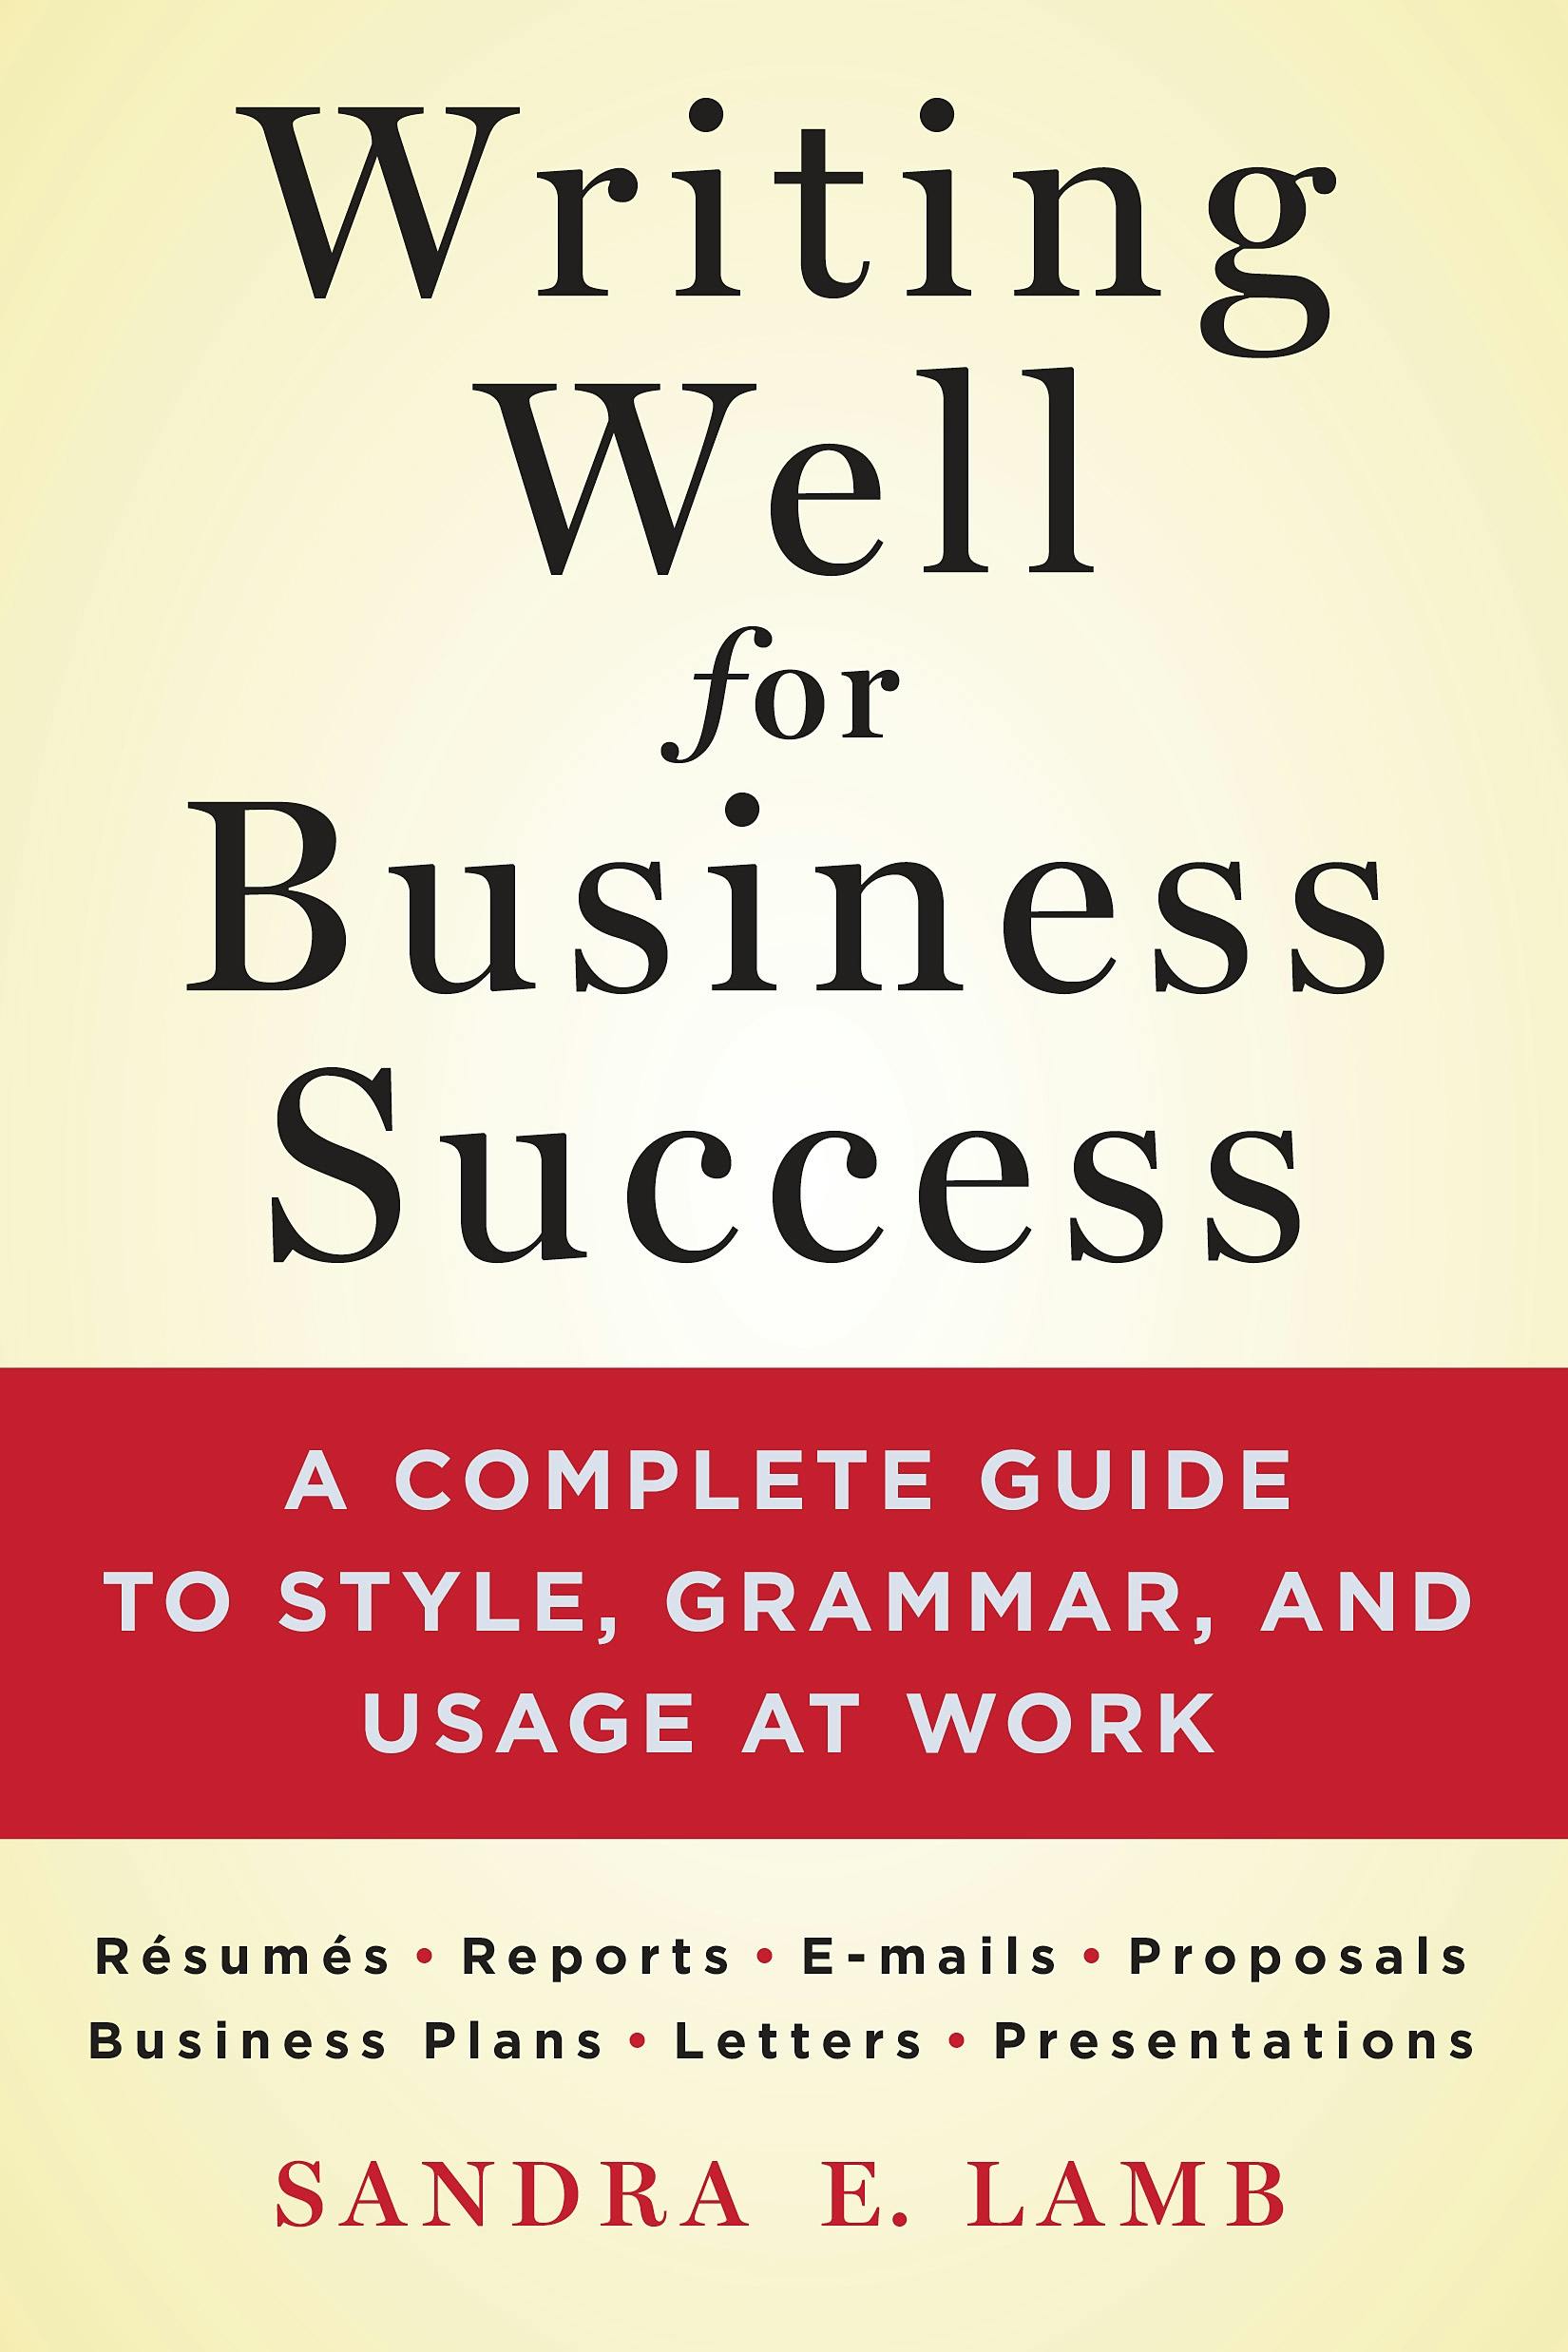 Describes for Writing Well for Business Success by authors